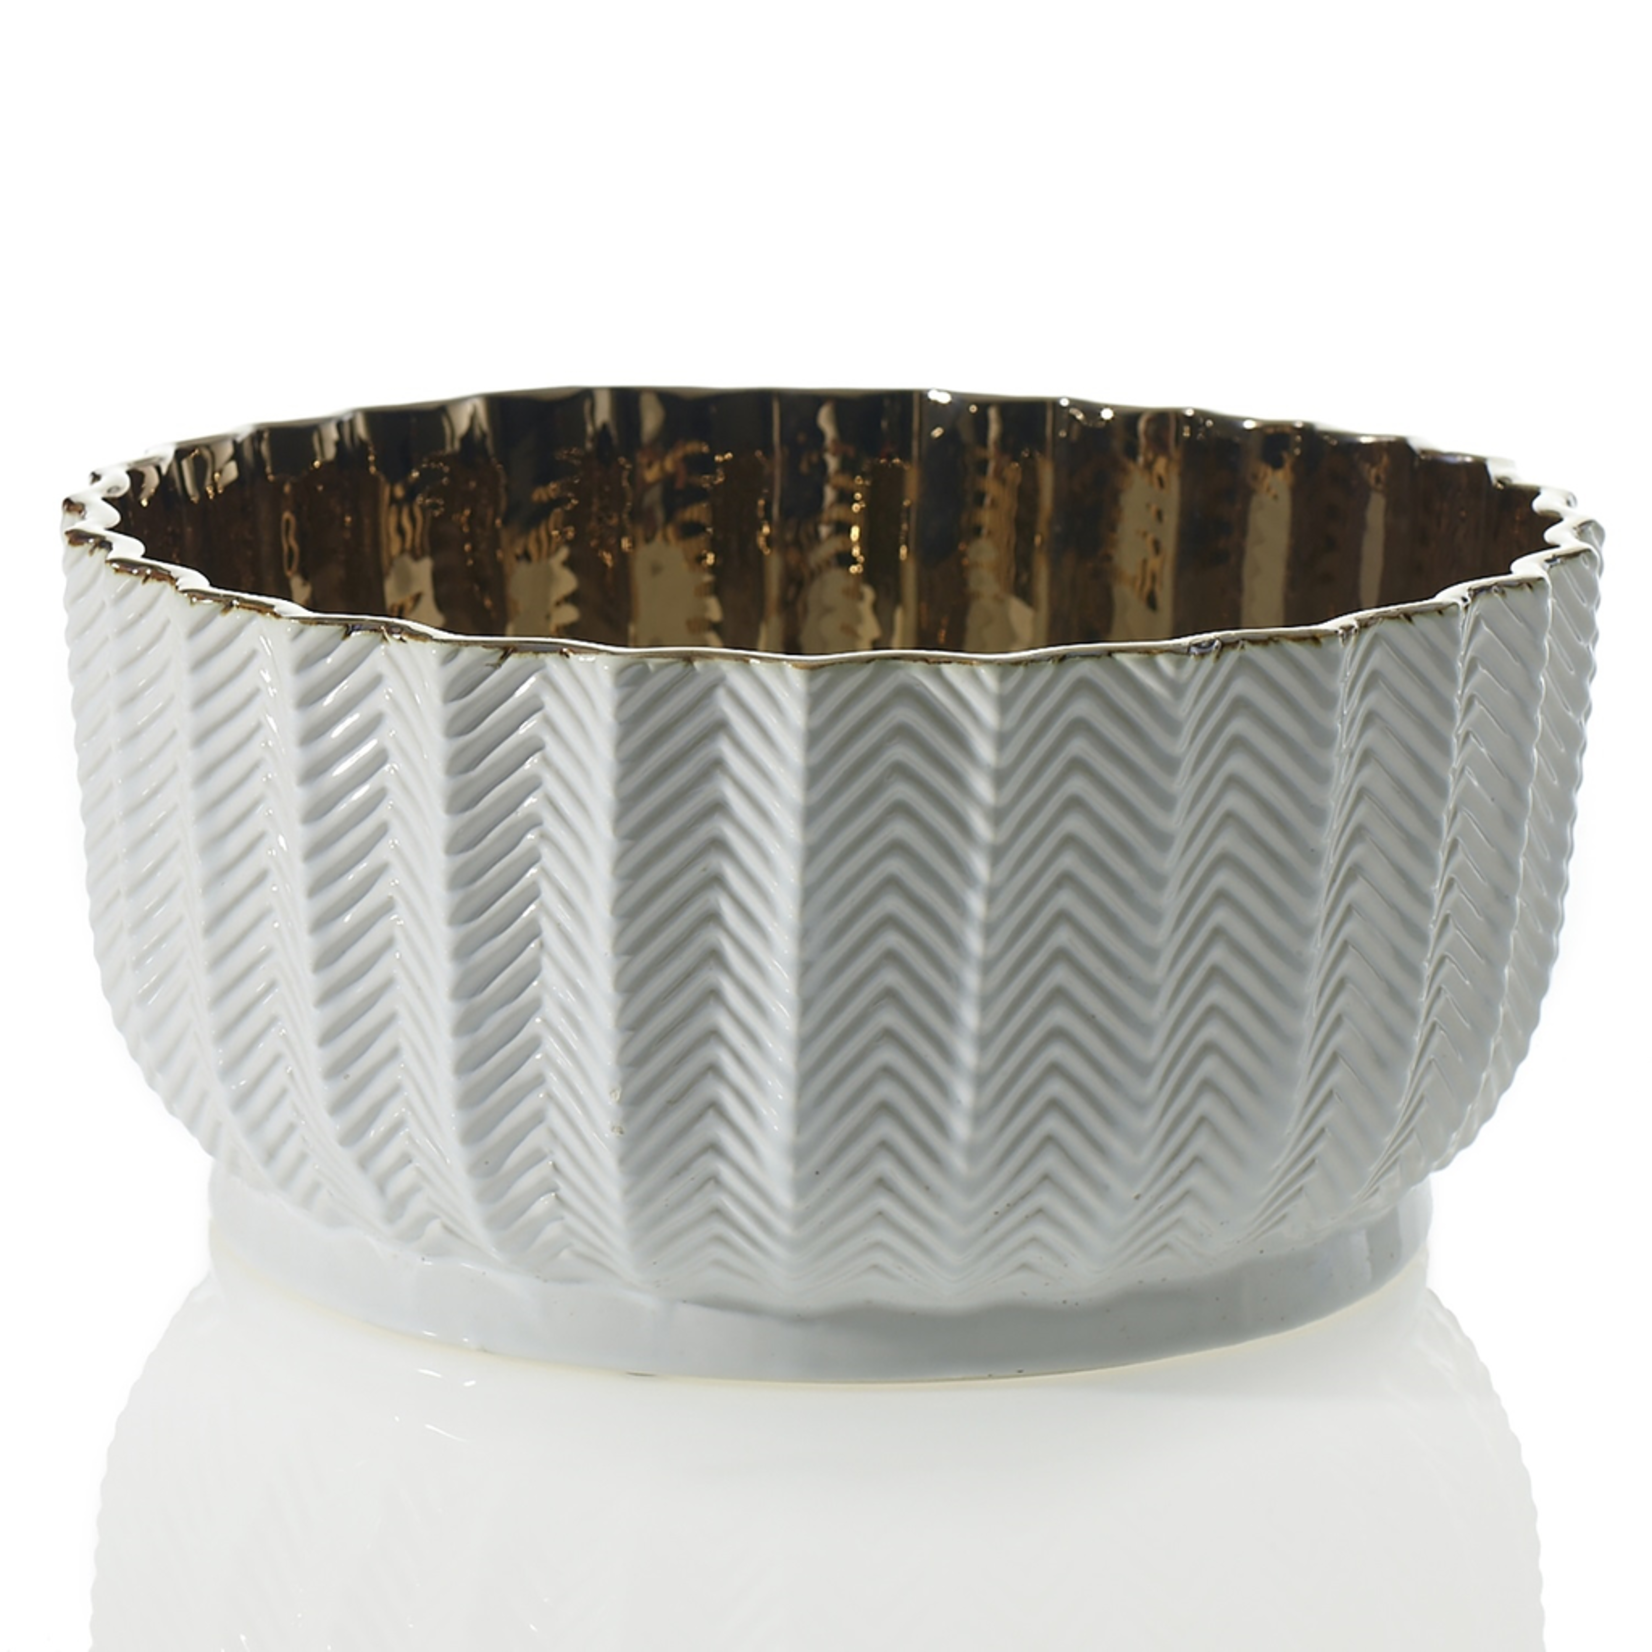 11.75'' x 5.5’'H MELROSE BOWL COLLECTION